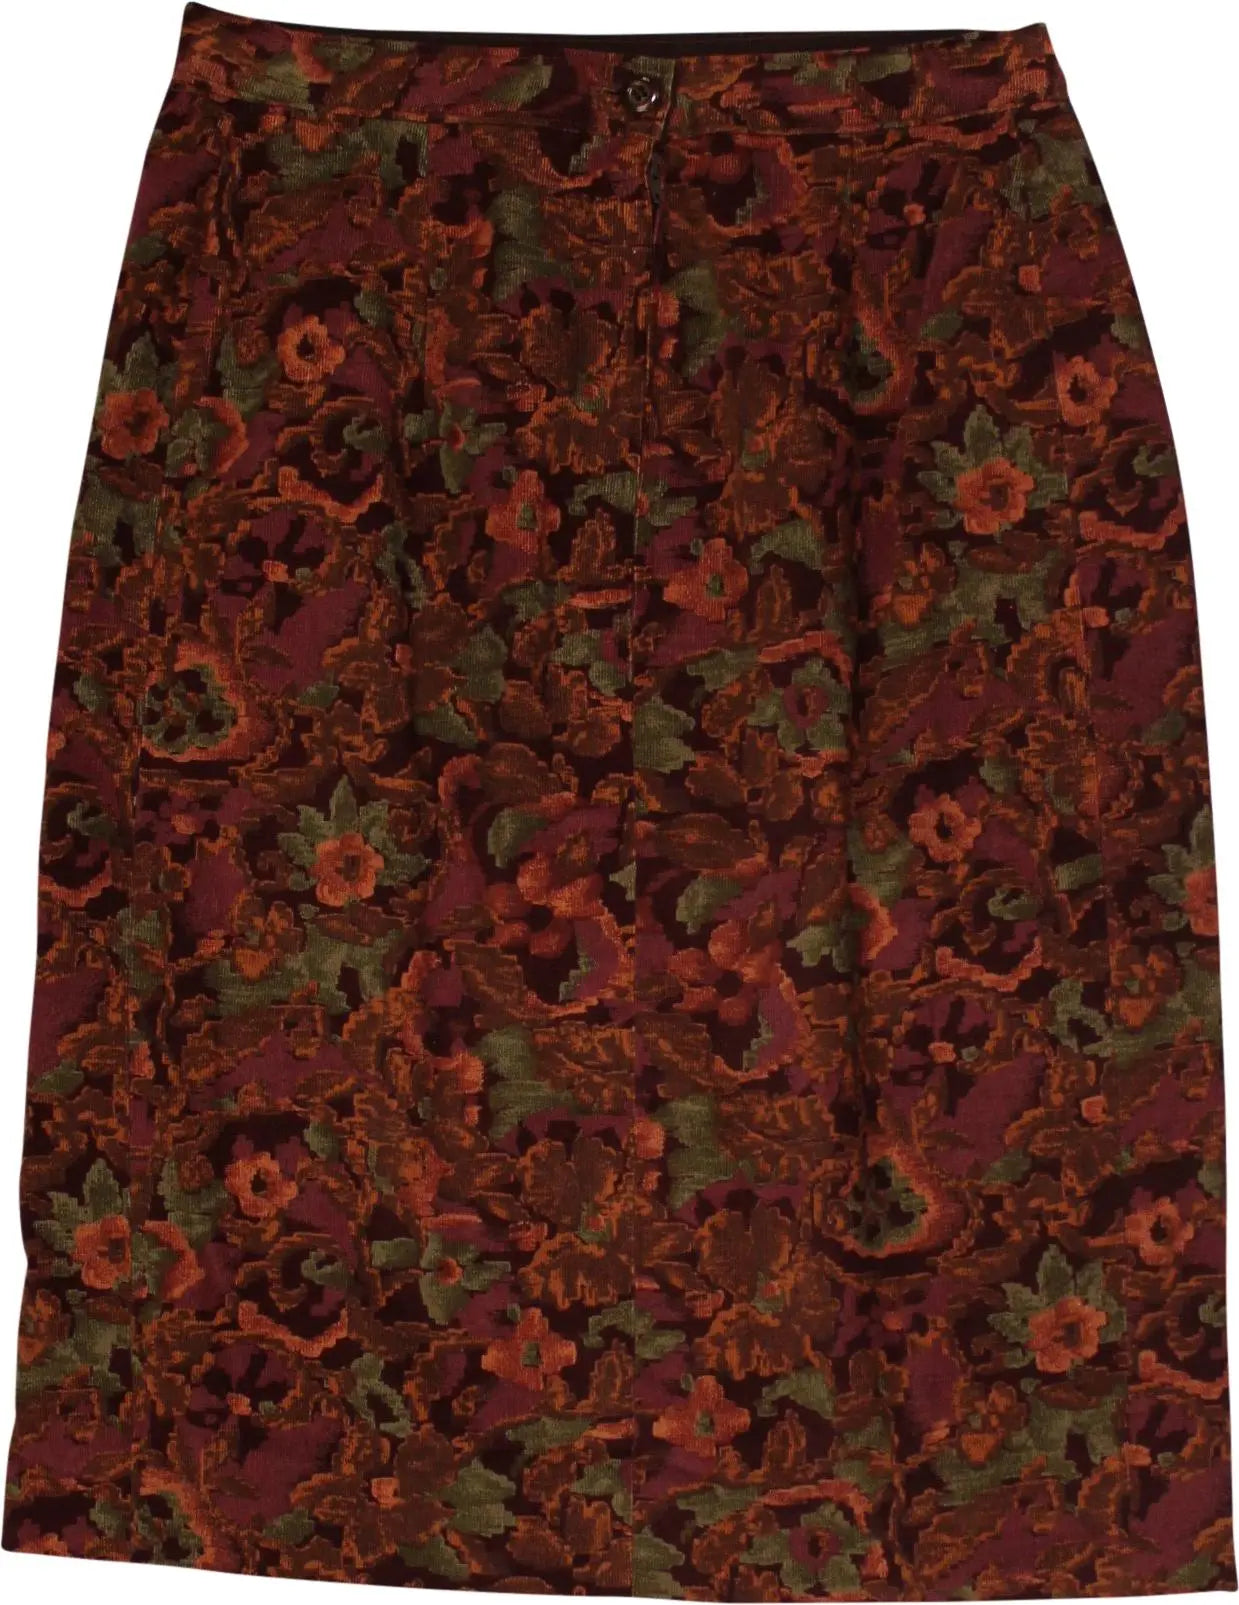 Handmade - Handmade Corduroy Skirt with Floral Print- ThriftTale.com - Vintage and second handclothing